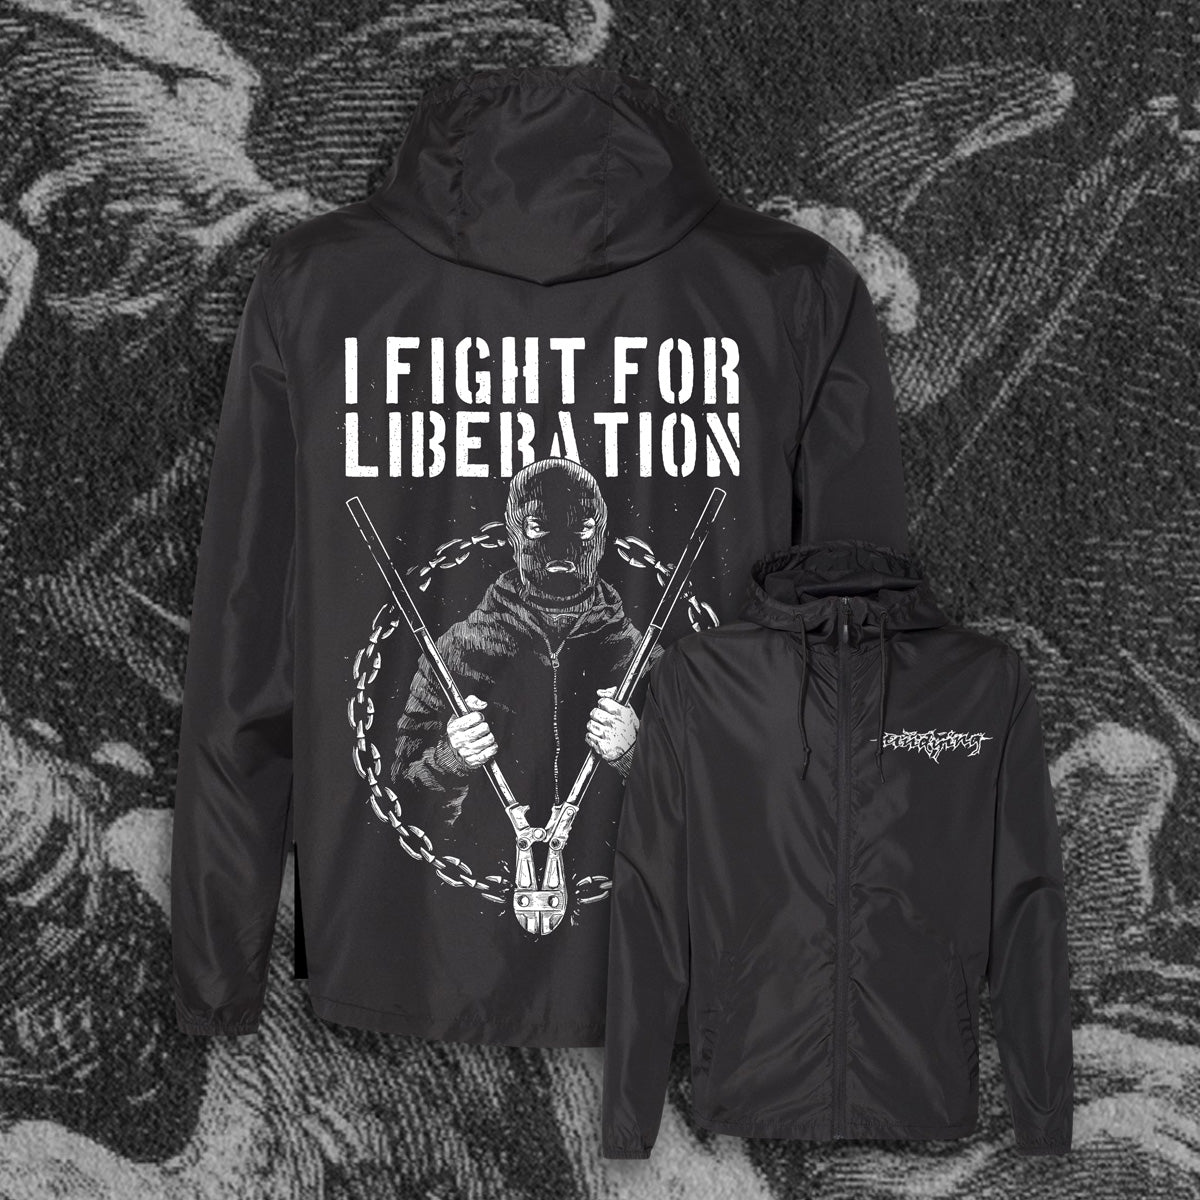 UNDYING "FOR LIBERATION"  ZIP UP WINDBREAKER